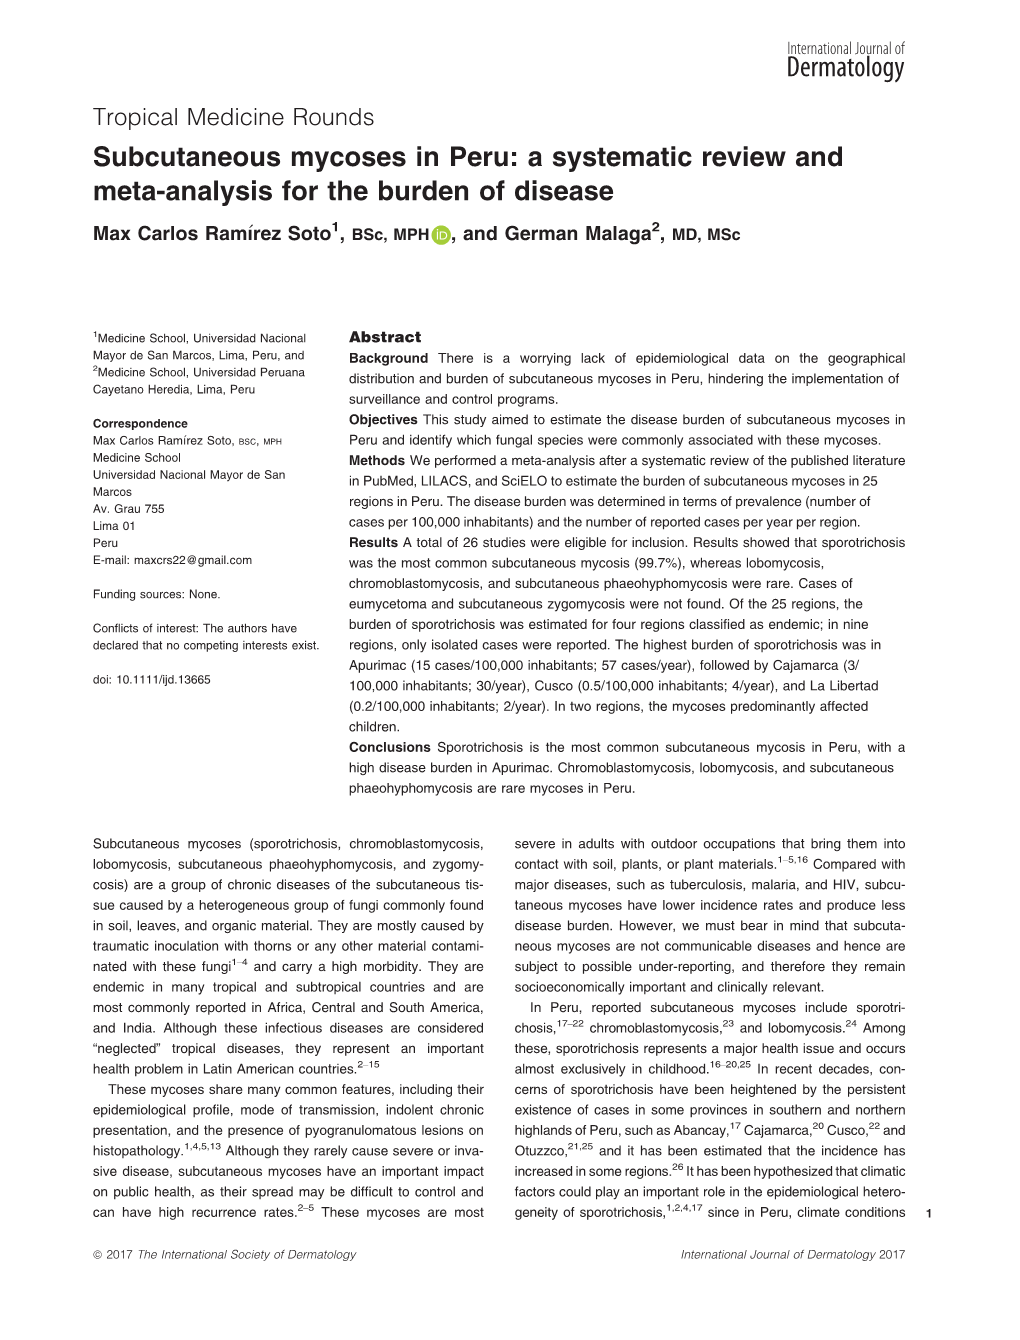 Subcutaneous Mycoses in Peru: a Systematic Review and Meta-Analysis for the Burden of Disease